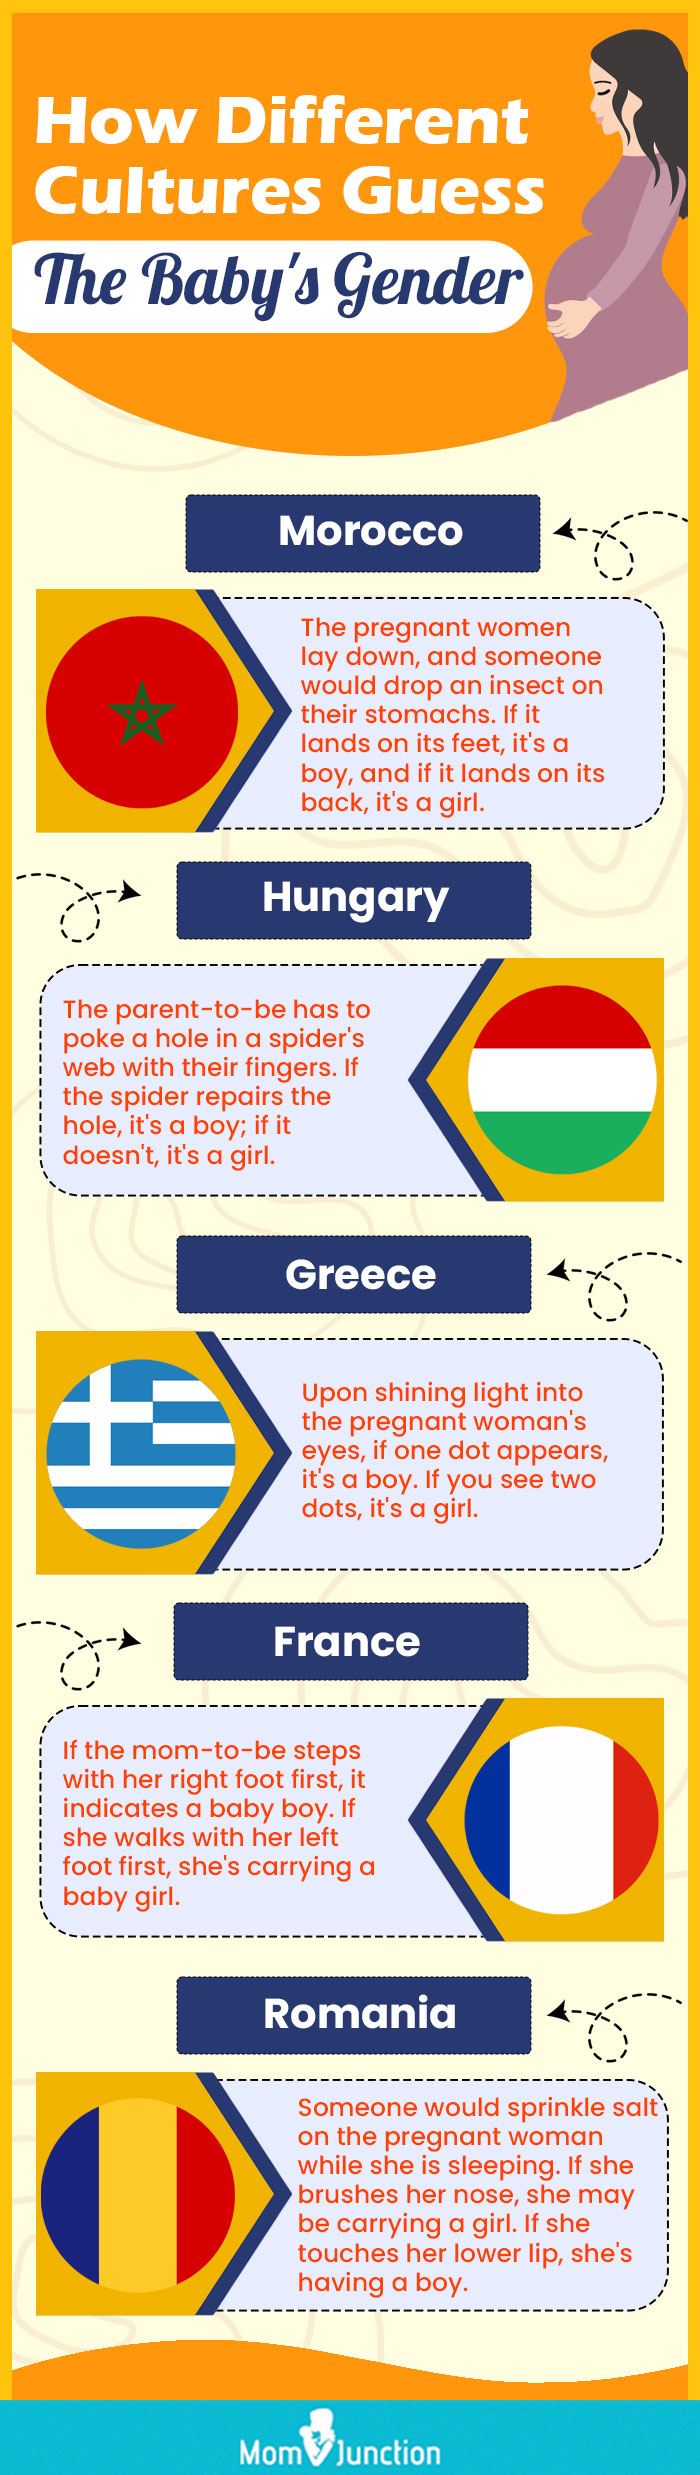 how different cultures guess the baby's gender [infographic]